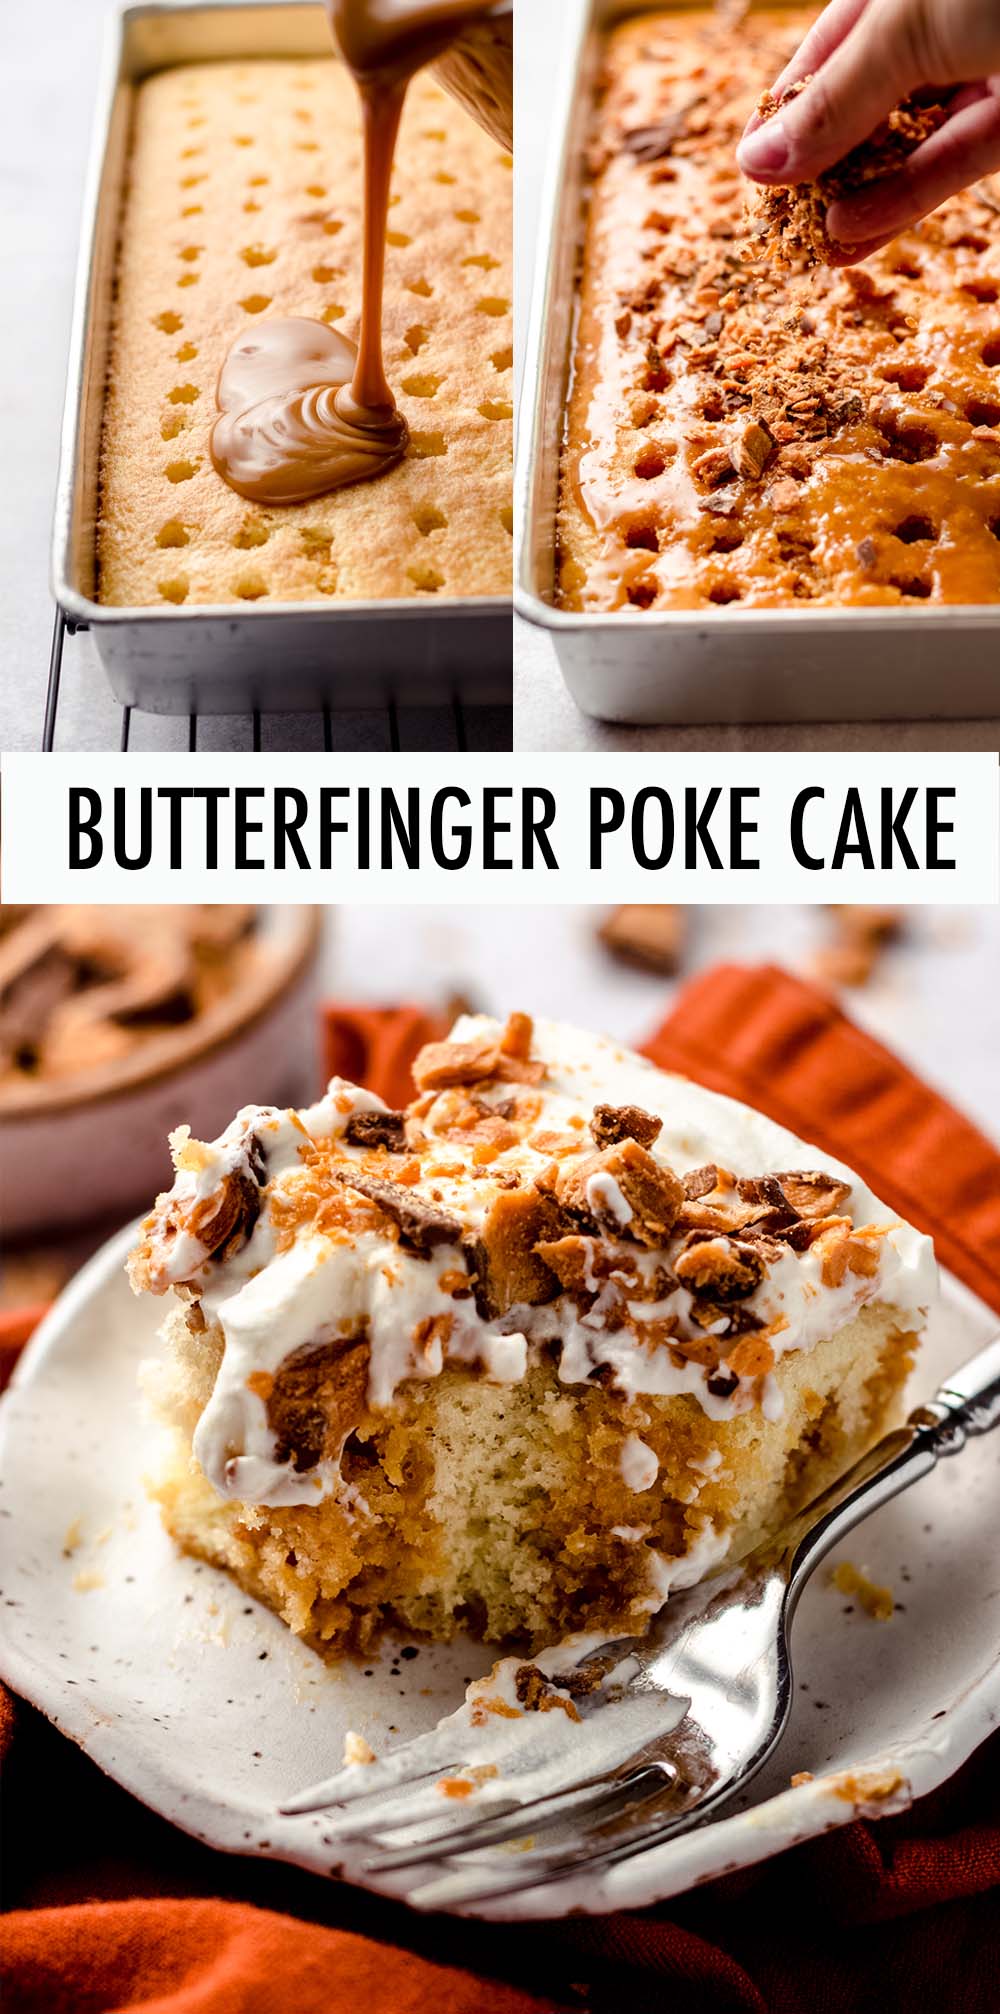 This easy poke cake recipe starts with a yellow box mix that, once baked, gets soaked in a sweetened condensed milk and caramel sauce topping. Top the cake with a simple whipped topping that gets sandwiched between two layers of chopped Butterfinger bars, and you have yourself an easy Butterfinger cake! via @frshaprilflours